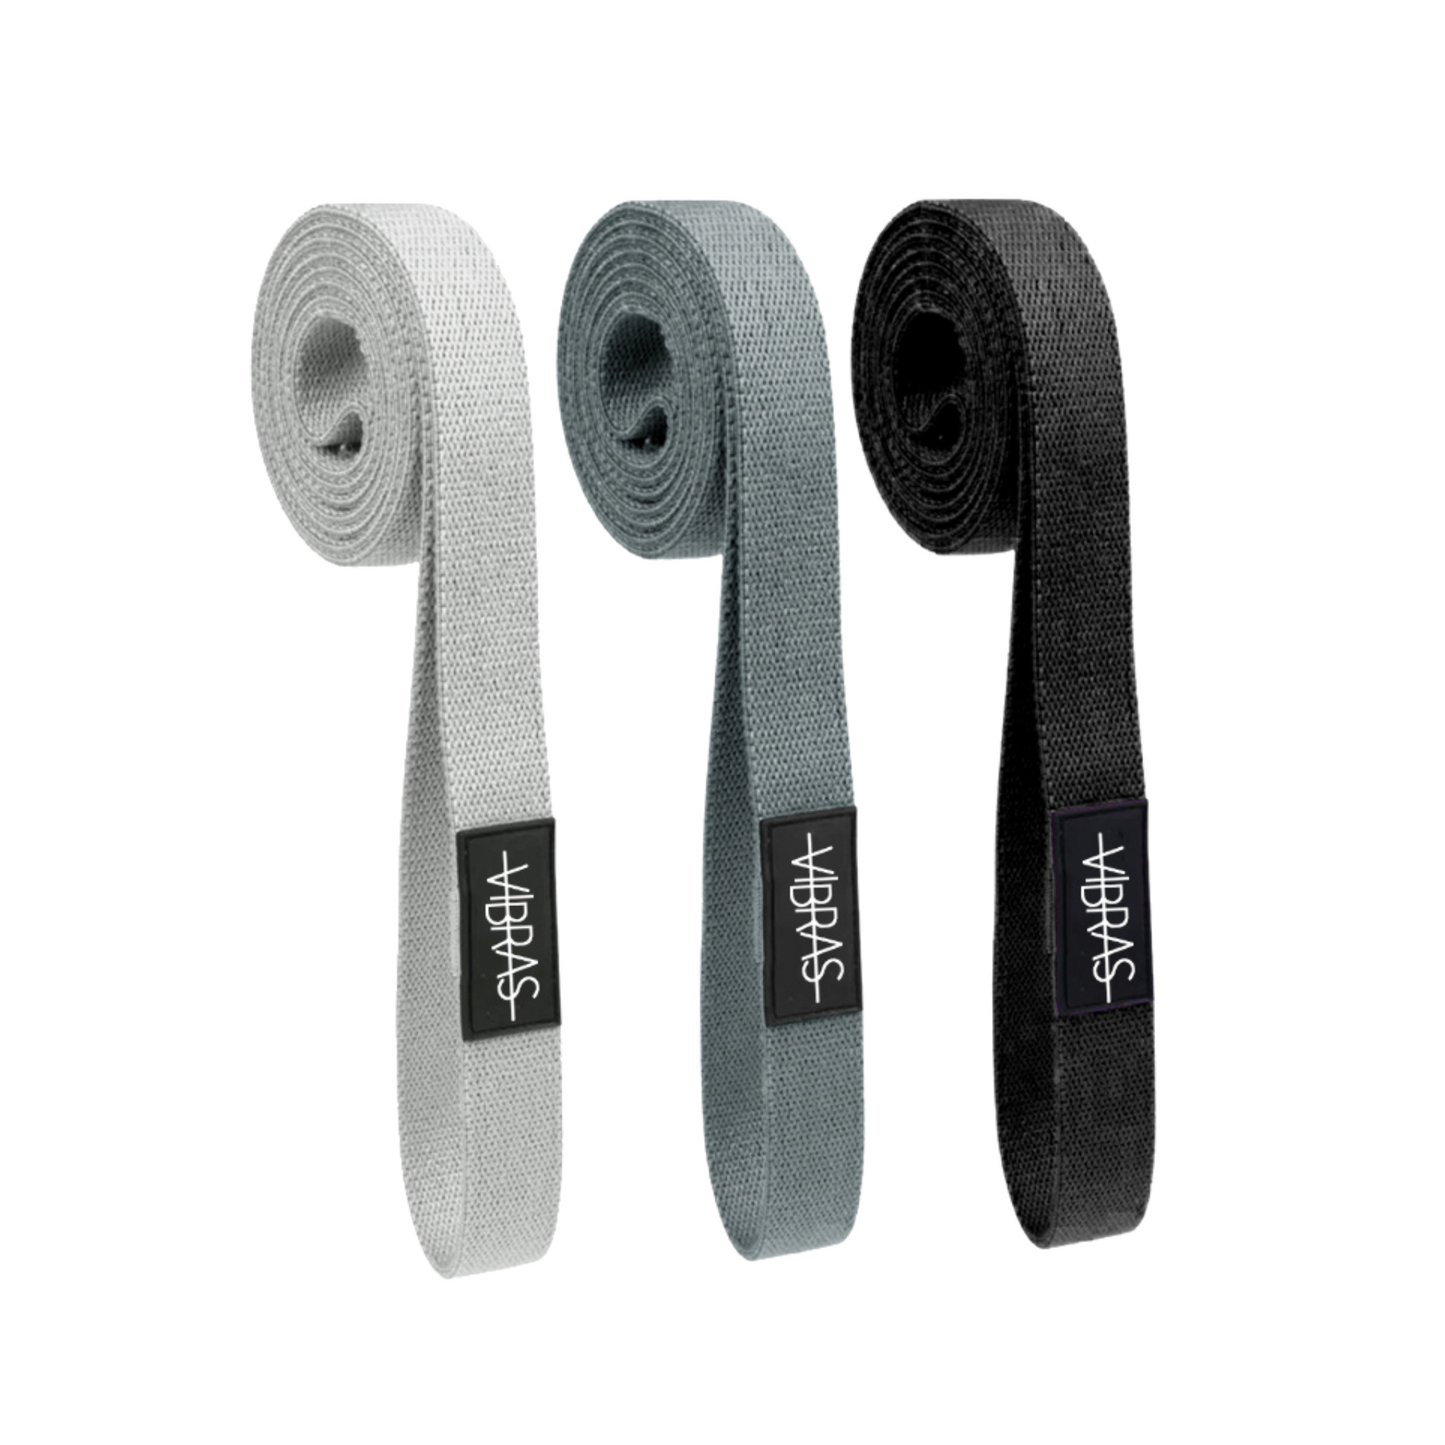 A set of three dark coloured long body resistance bands from vibras on a white background